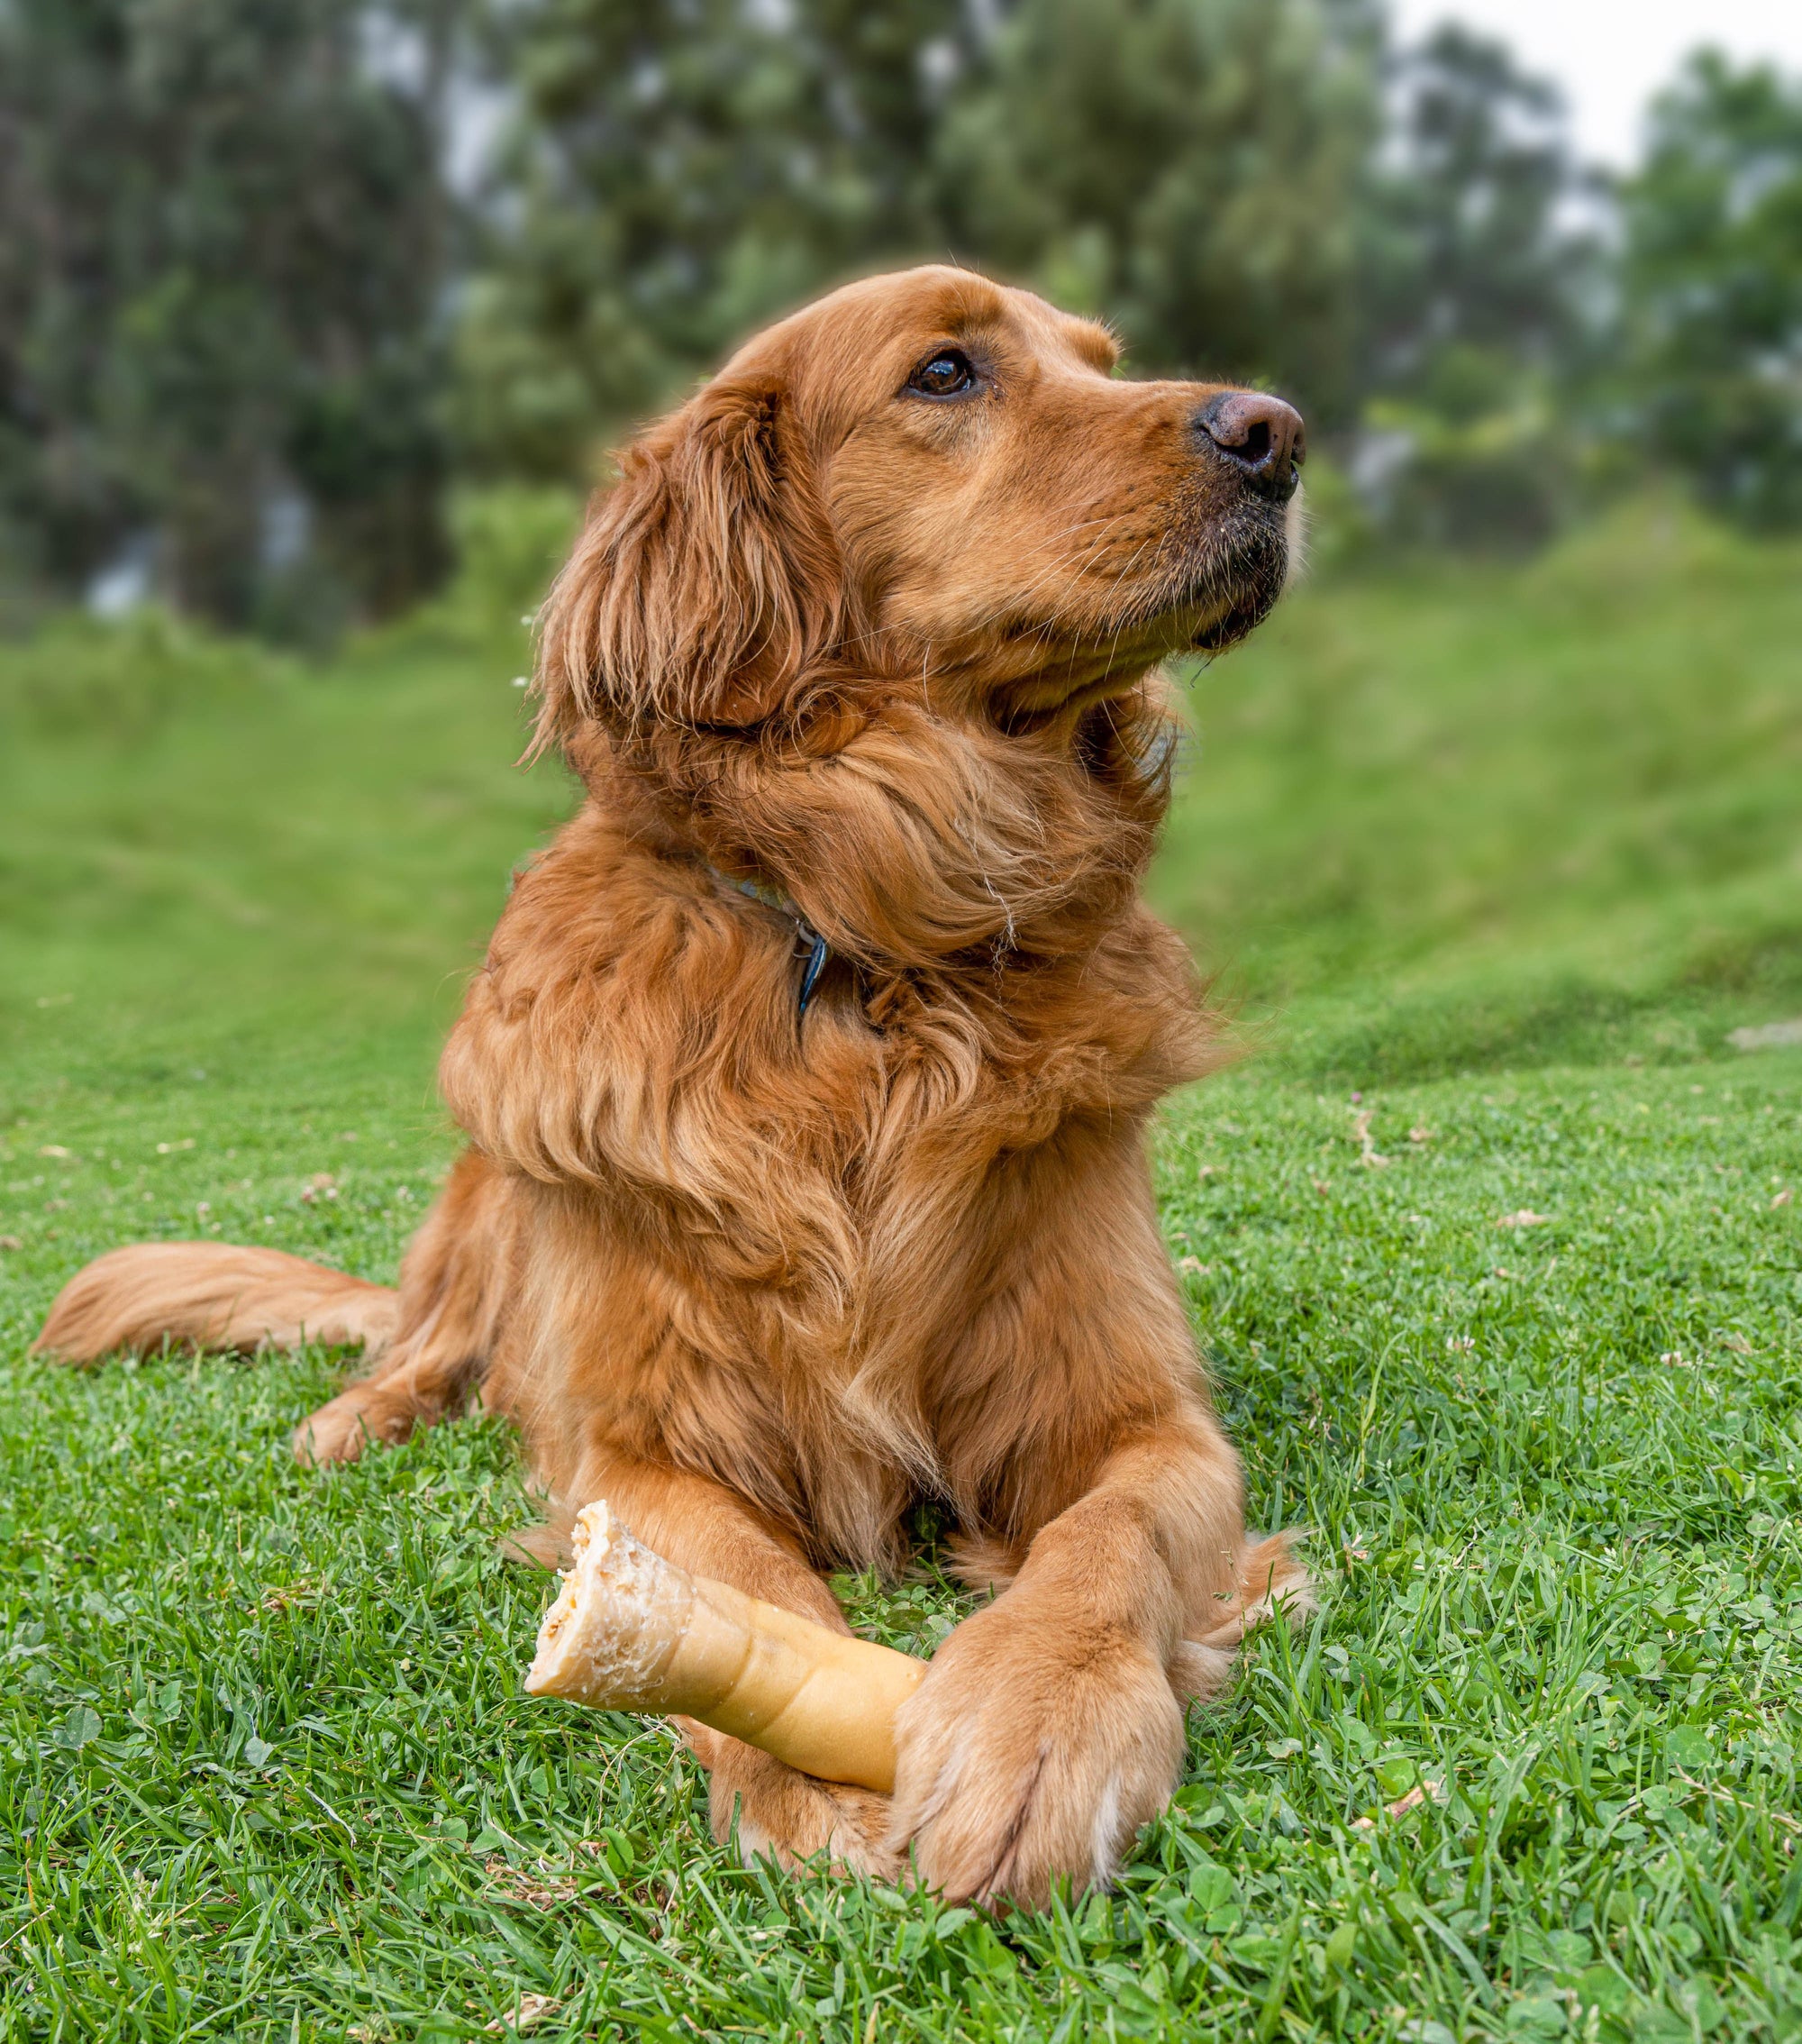 10 Important Tips for New Golden Retriever Owners 